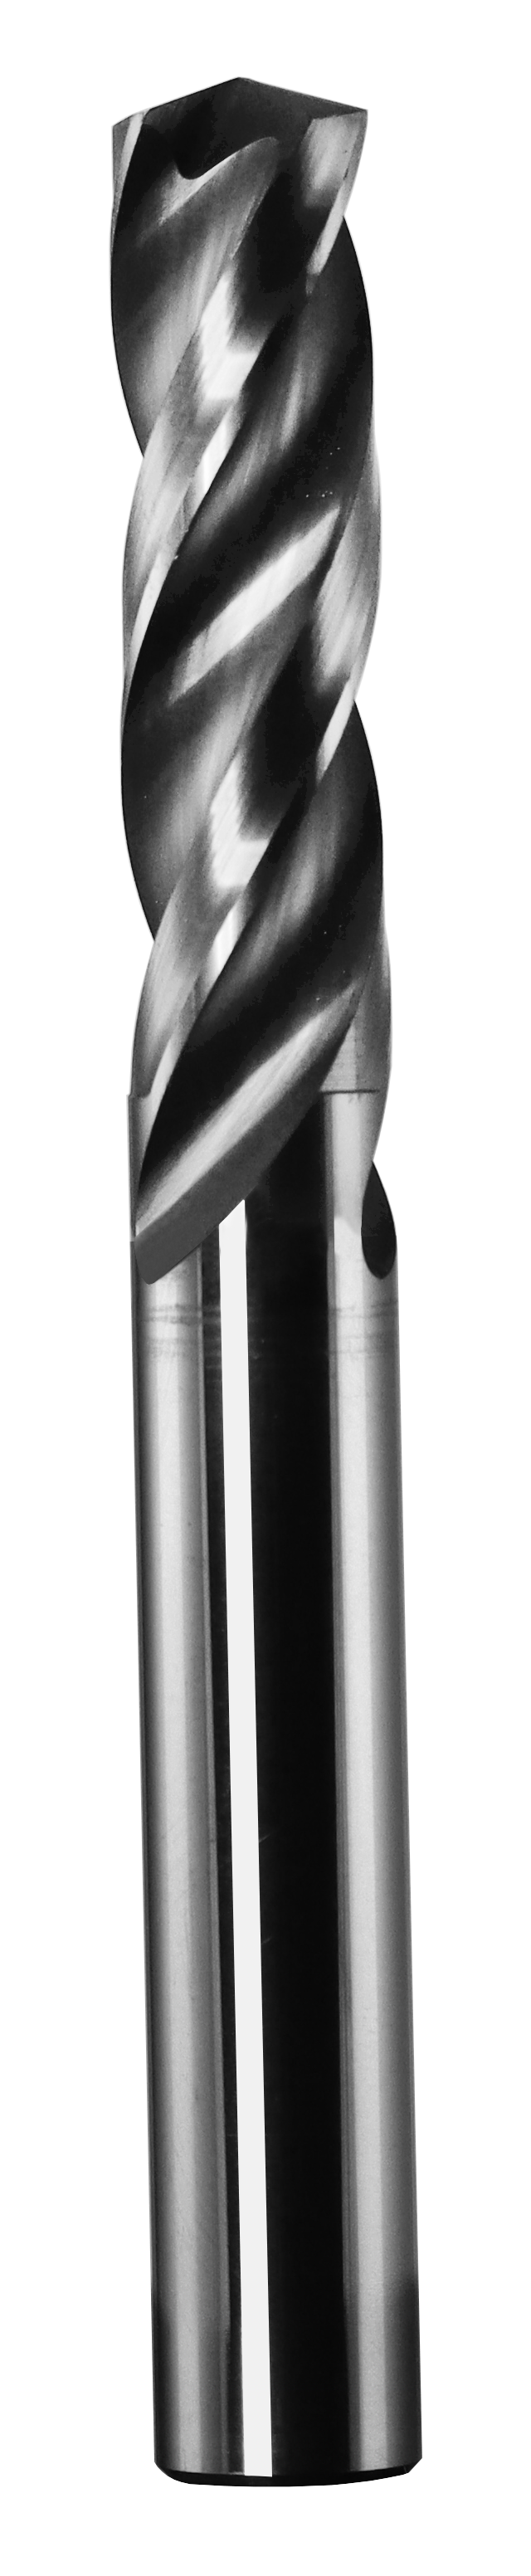 7.20mm Dia, 150 Degree Point, Solid Carbide Drill - 63015